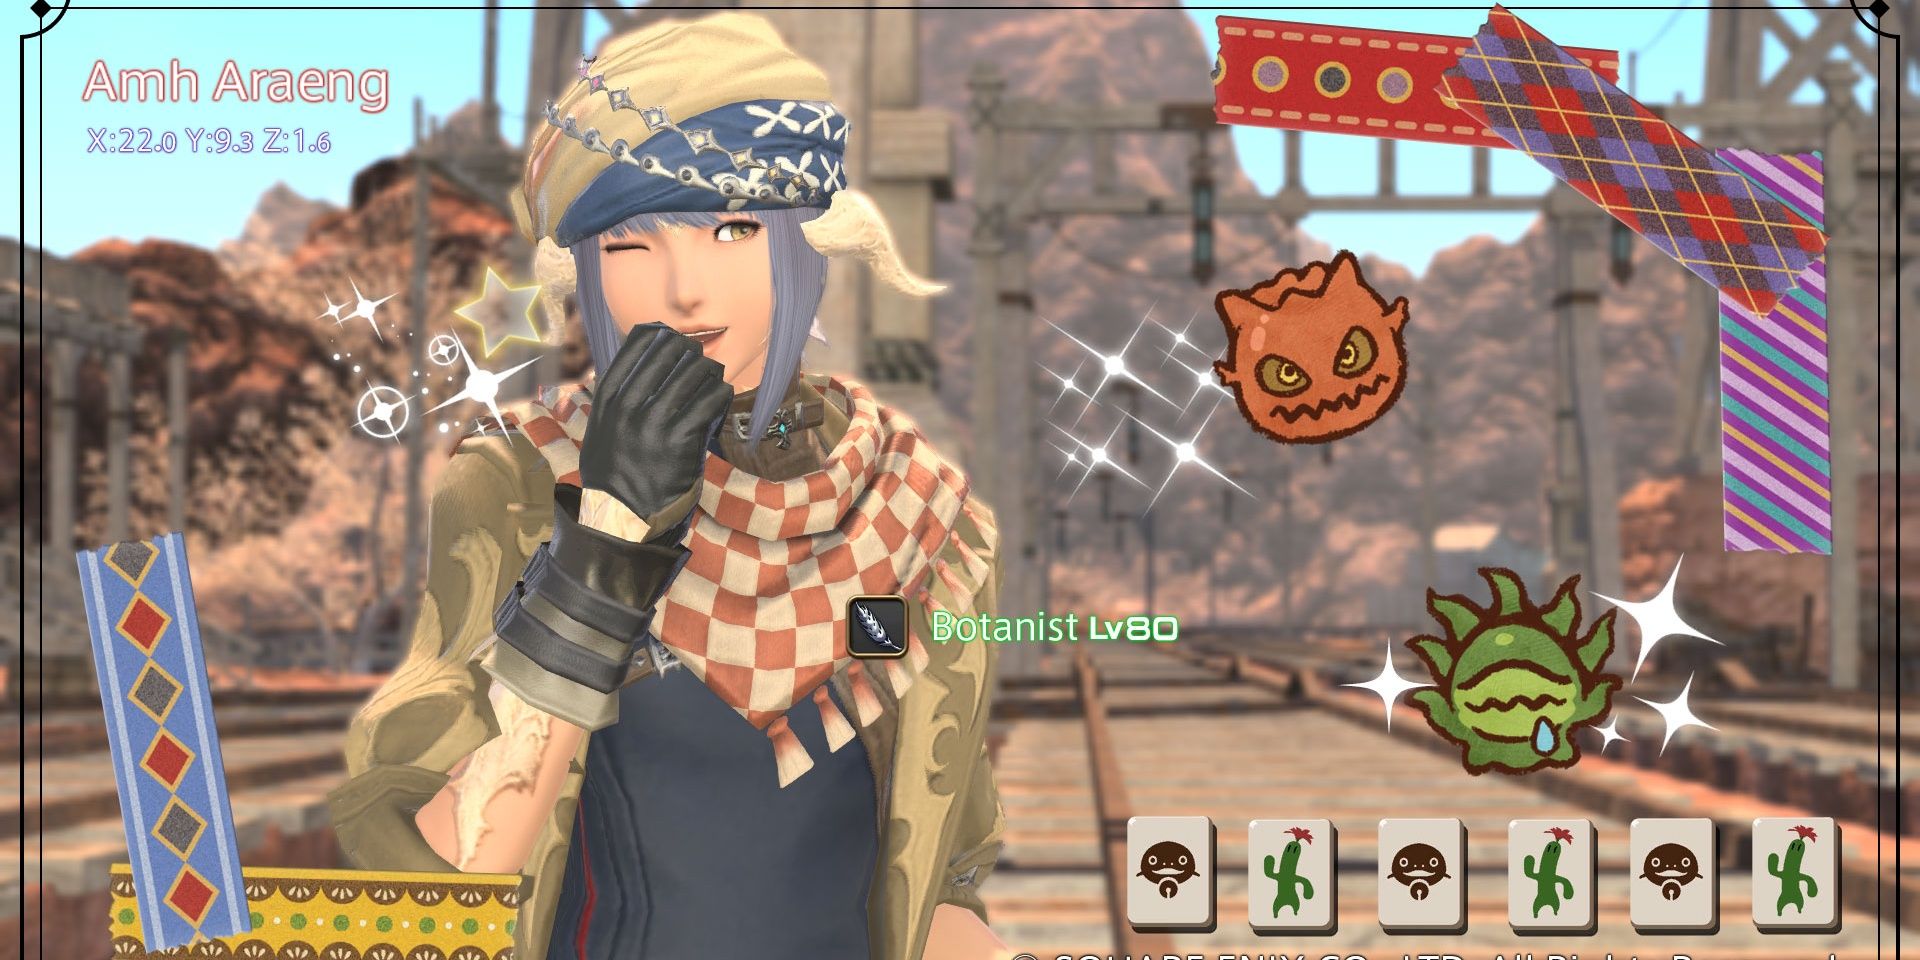 Pose for photos with stickers and frames in Final Fantasy 14